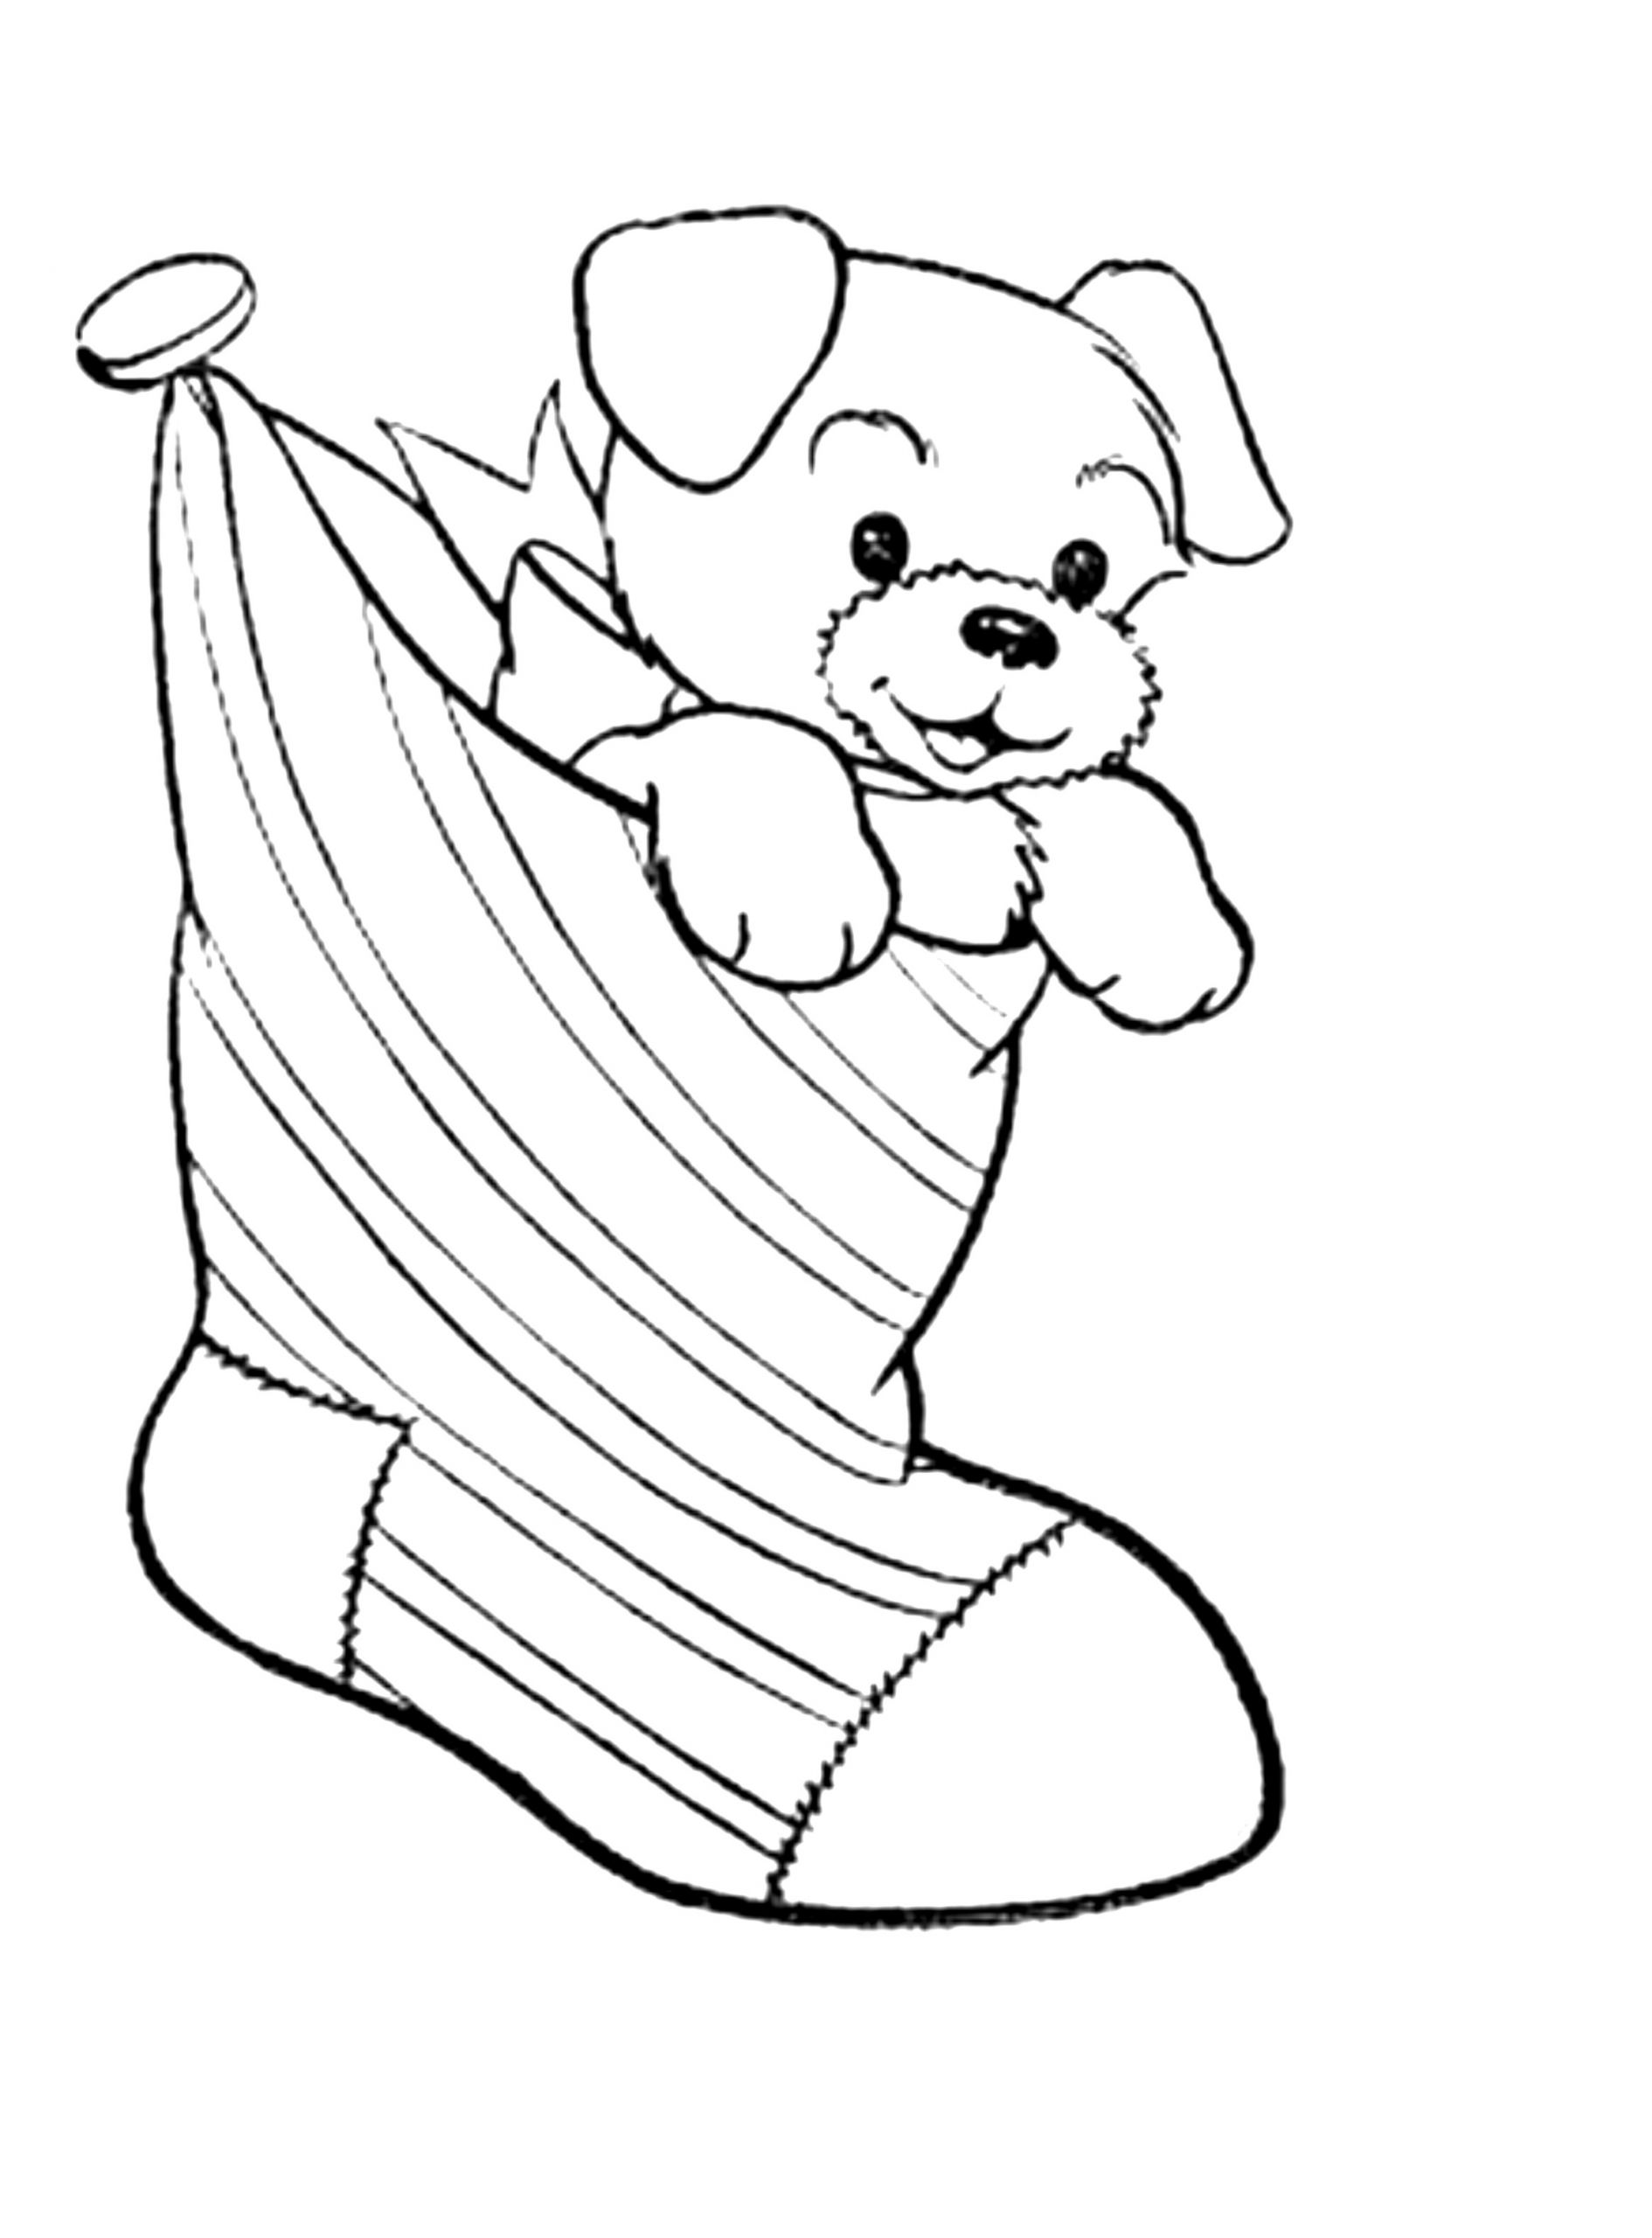 Download Coloring Pages For Kids
 Cute Coloring Pages to Print Download